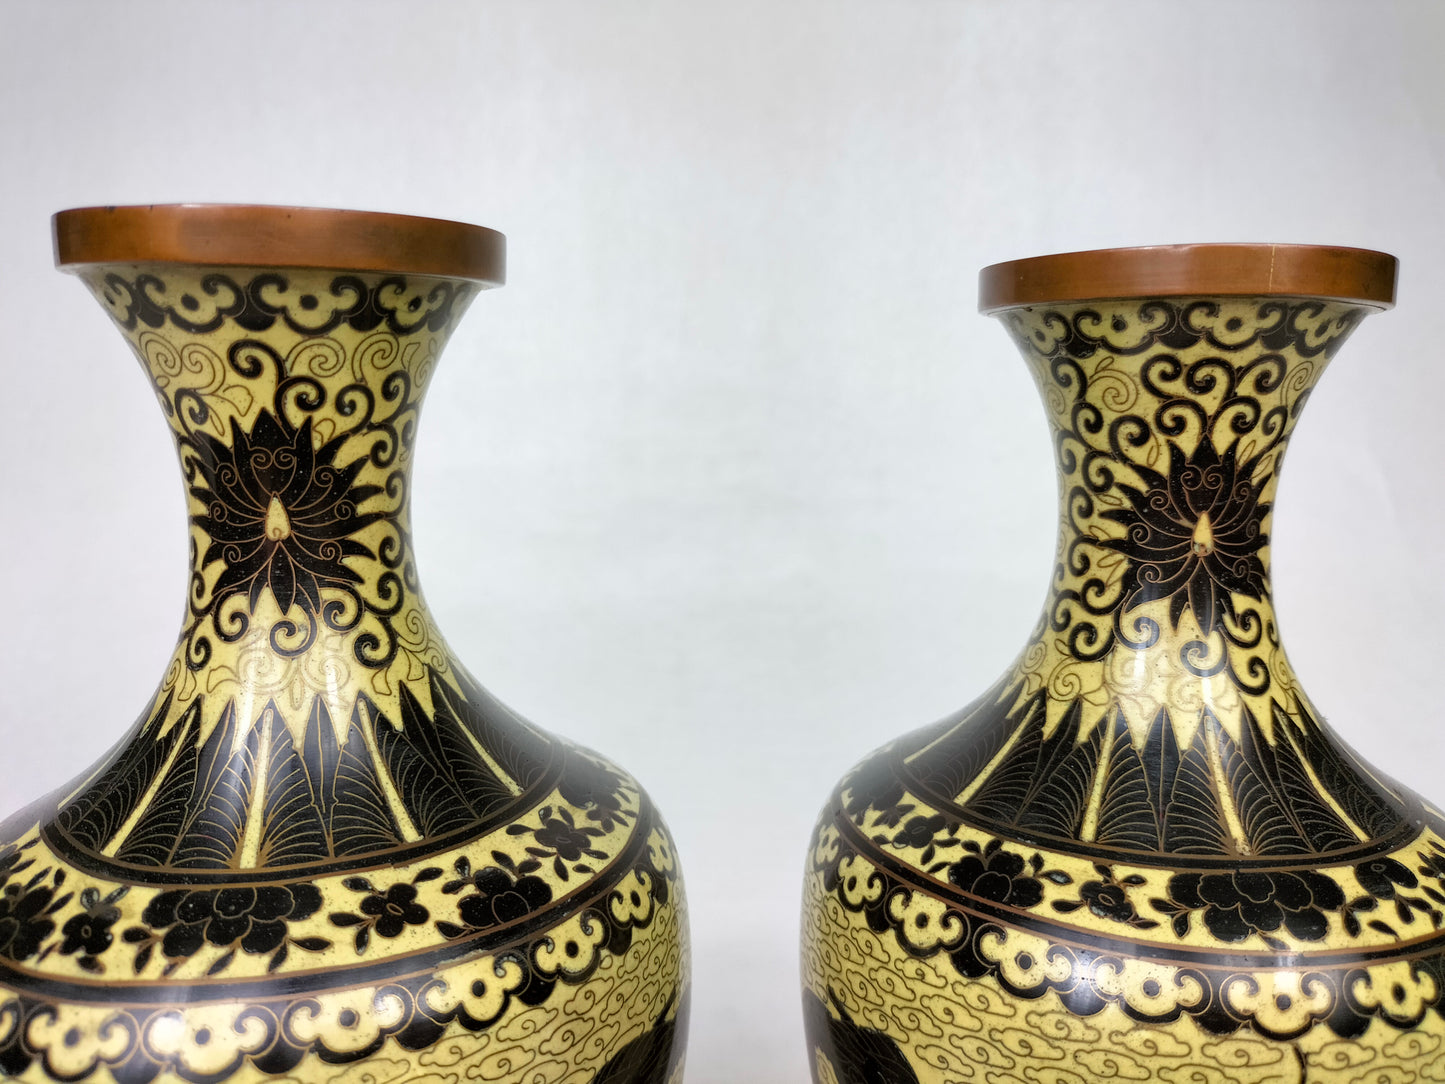 Pair of antique Japanese cloisonne vases with Imperial dragons // Early 20th century